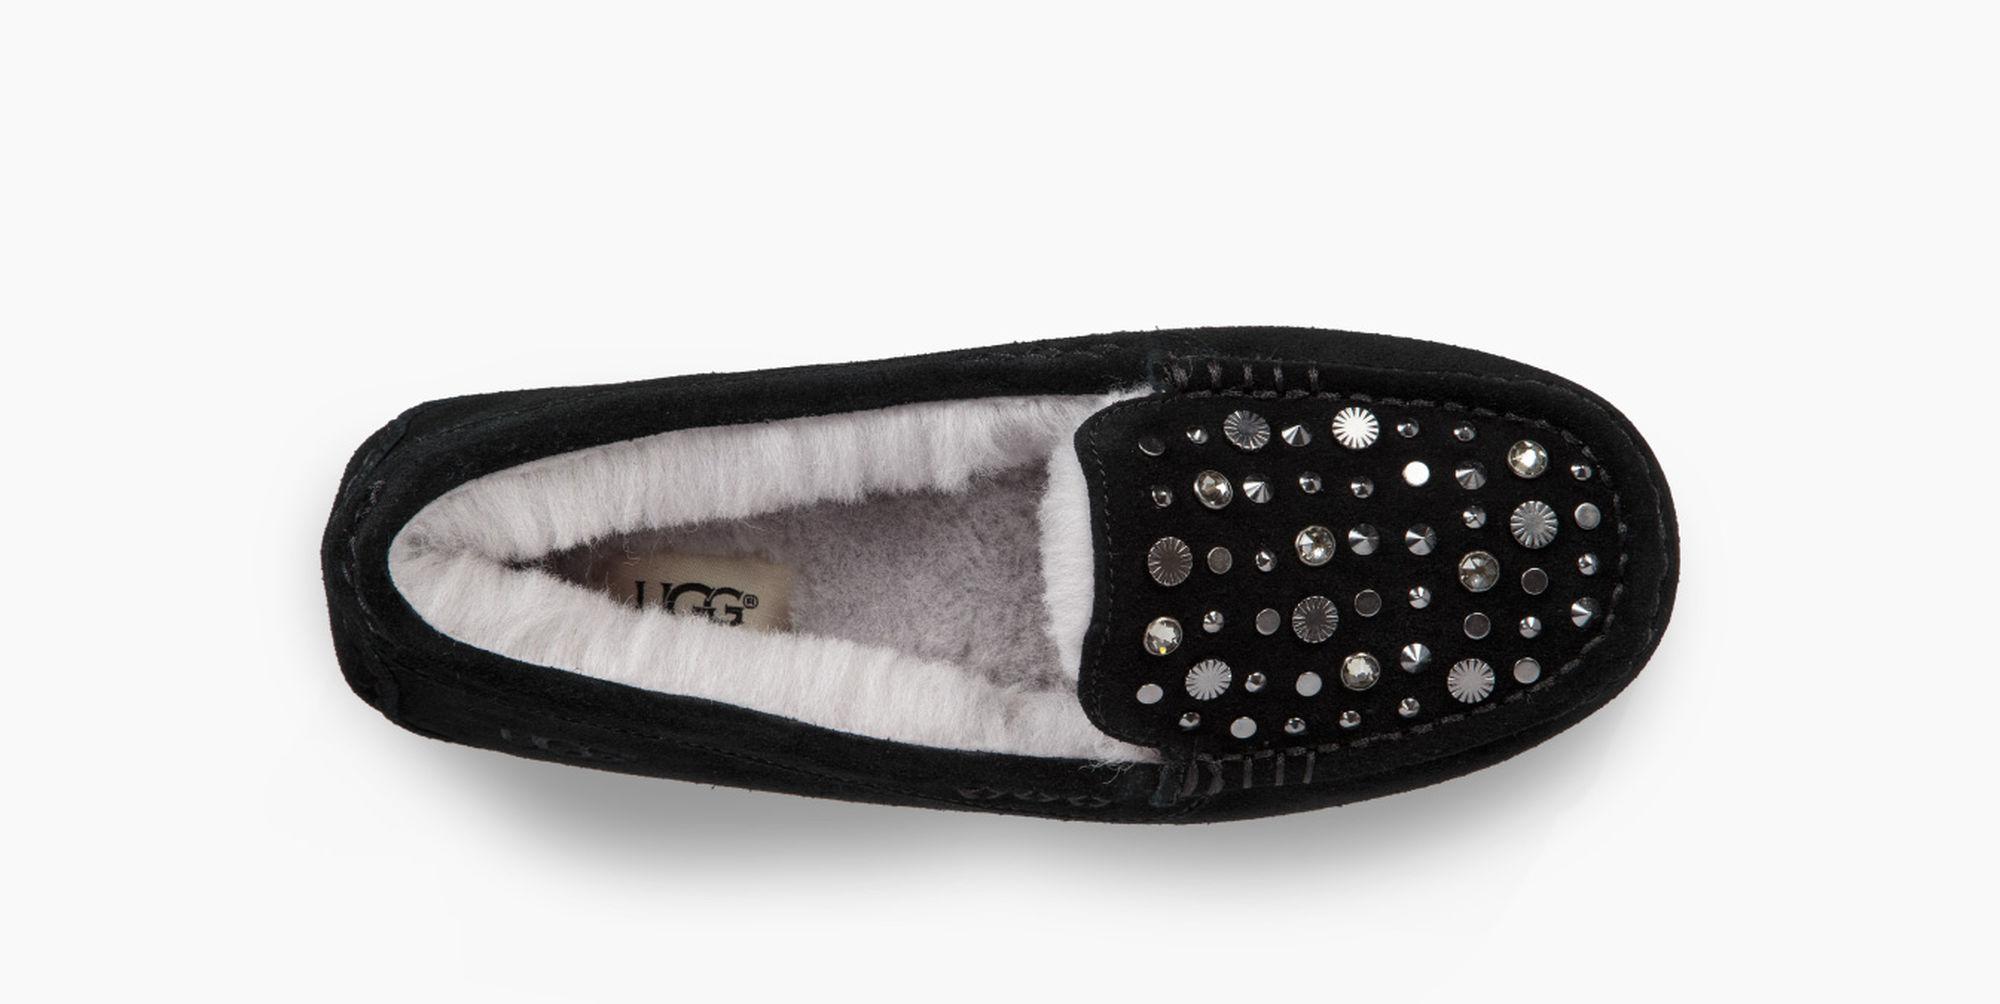 ugg studded slippers Cheaper Than 